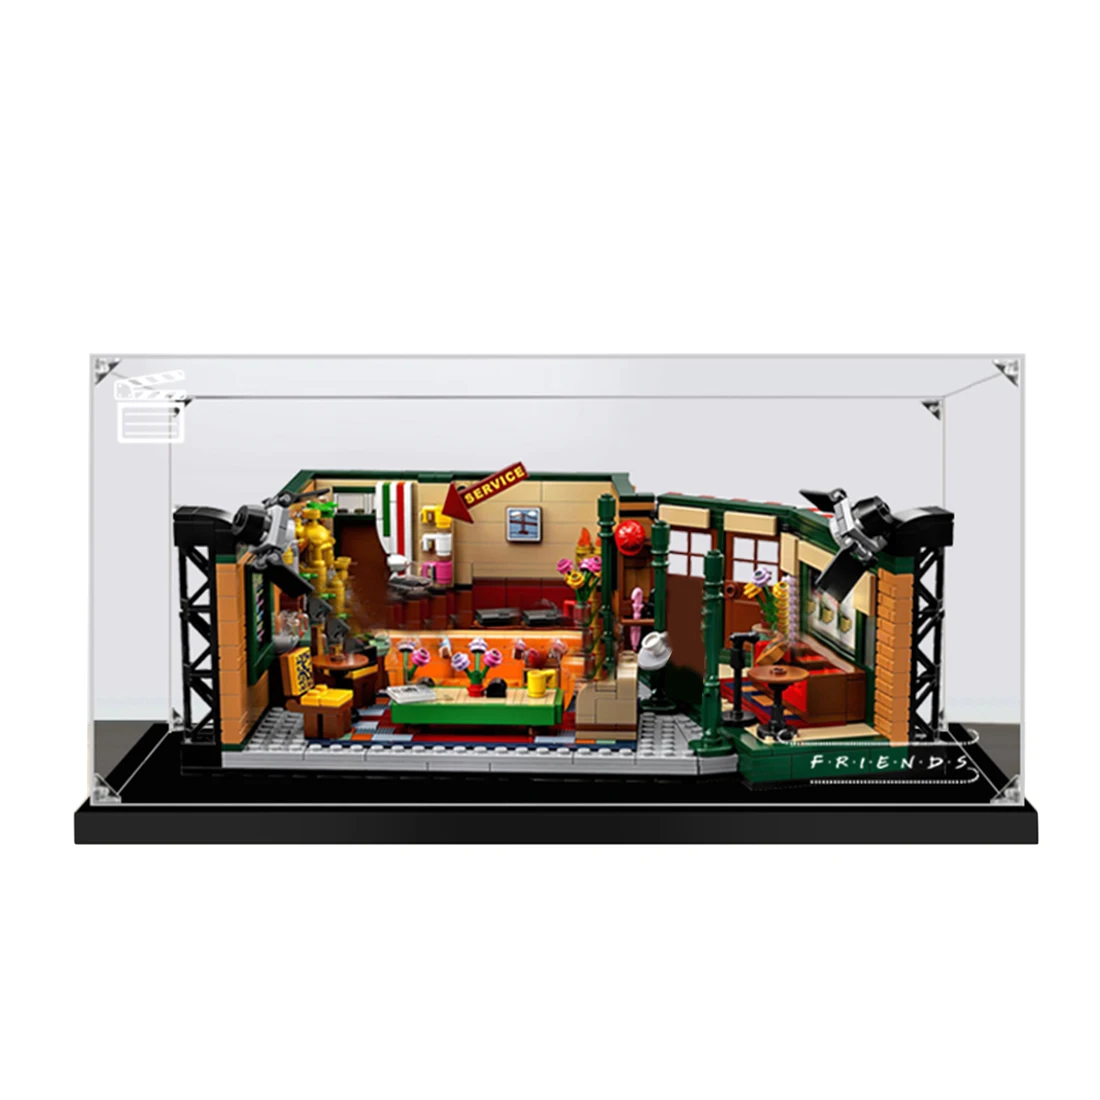 

35 x 25 x 15cm 2mm Assembly Acrylic Display Box for 21319 Central Perk Showcase Friends Cafe Blocks Accessories S-grade No Glue